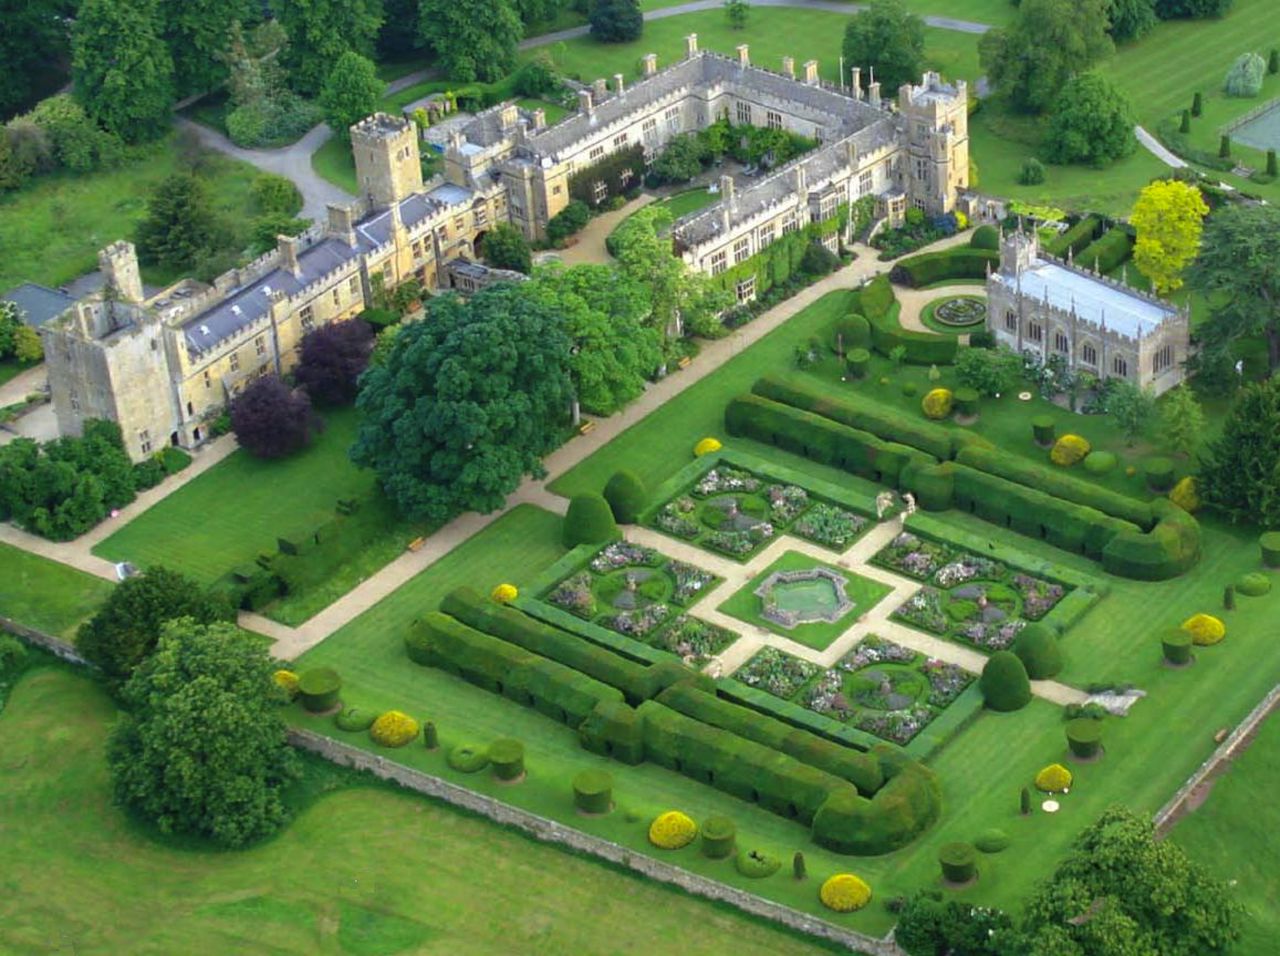 Sudeley Castle, located in the Cotswolds in Gloucestershire, was built in the 15th century. It was besieged, and parts of it ruined, during the English Civil War. Home to the Dent-Brocklehurst family for the last 200 years, it is known for its beautiful gardens.